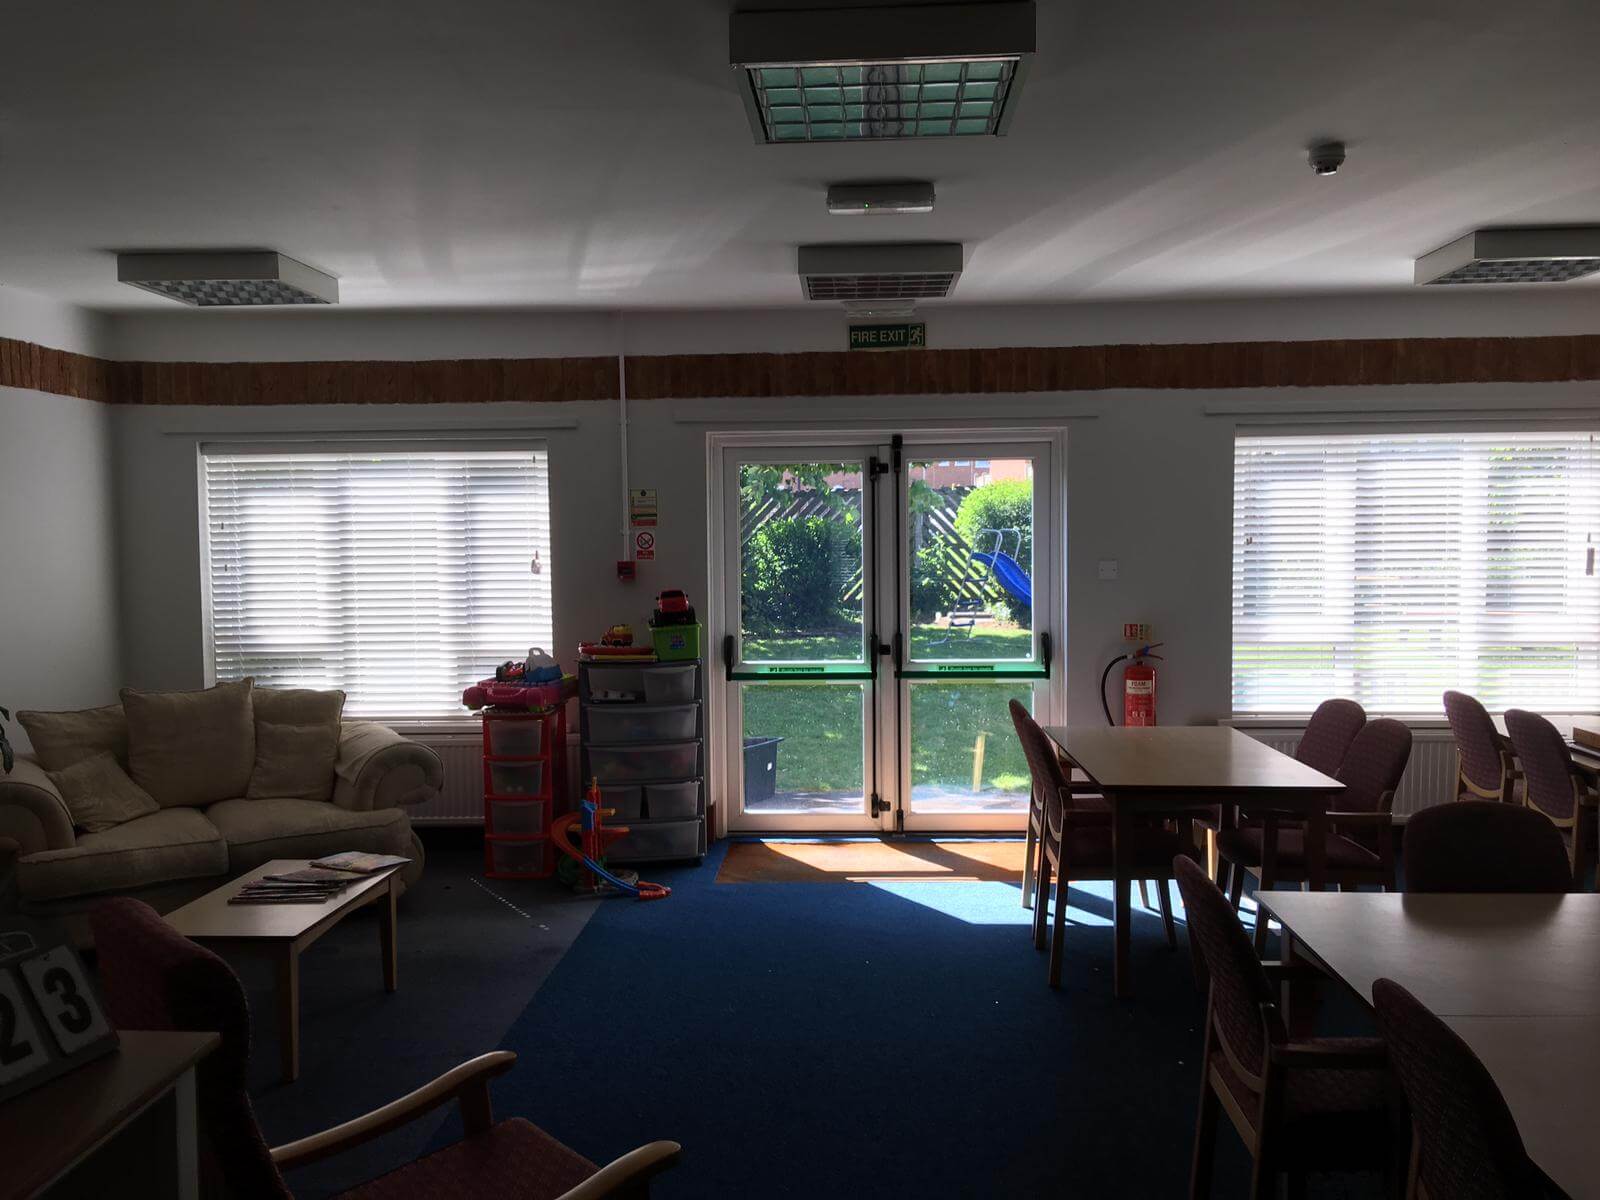 Commercial Blinds For Care Homes Arnold